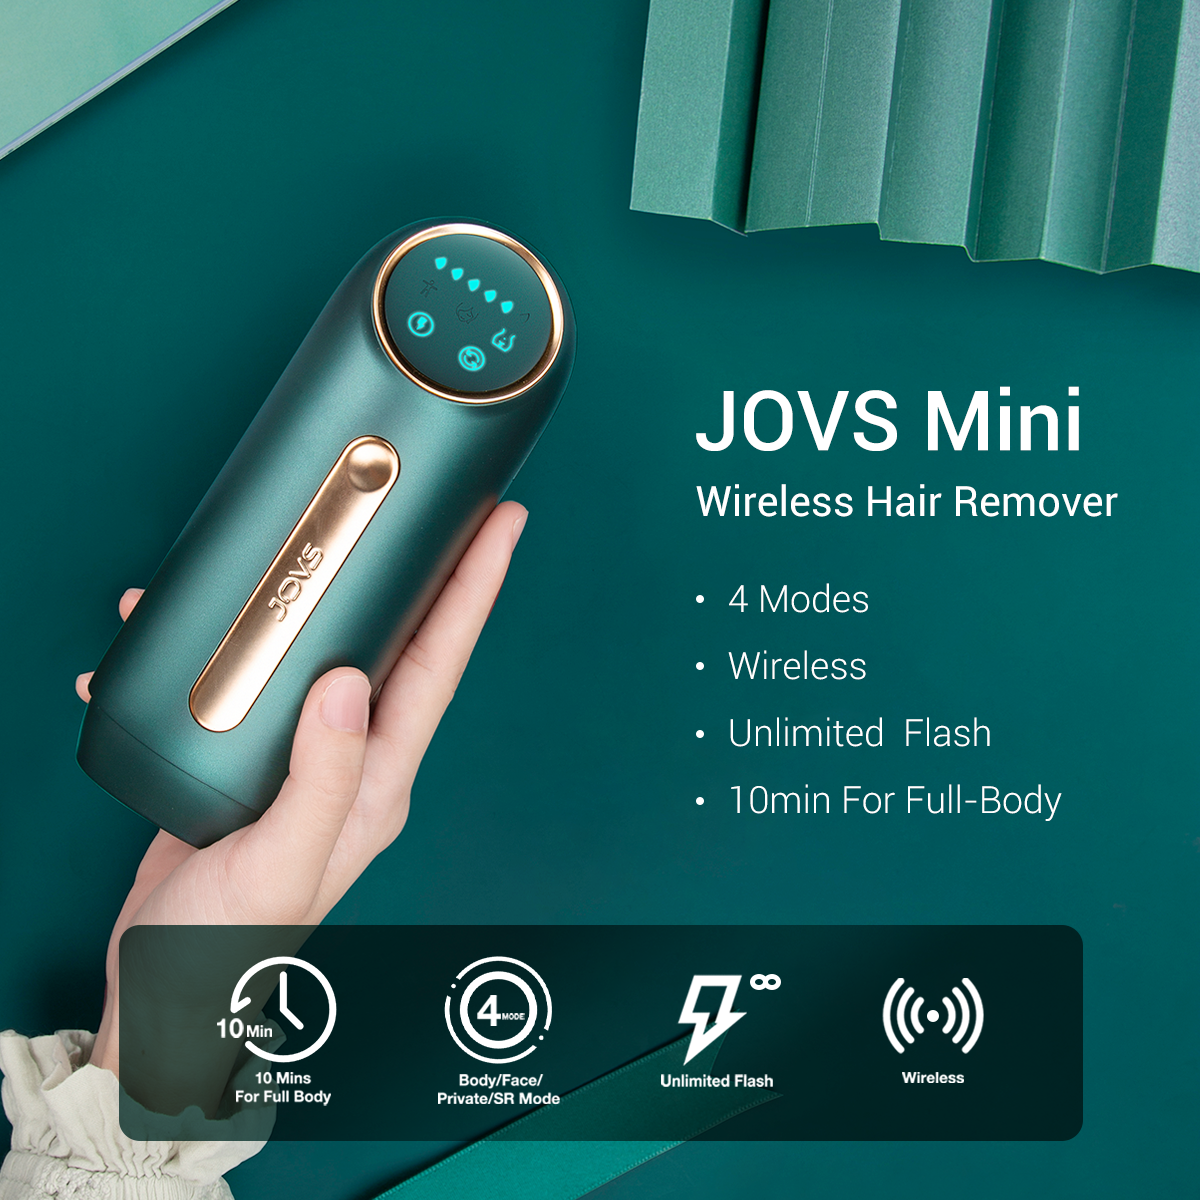 JOVS Mini Wireless Hair Removal Device in Emerald with Gold Accents Featuring 4 Modes, Unlimited Flash, and 10-Minute Full-Body Treatment